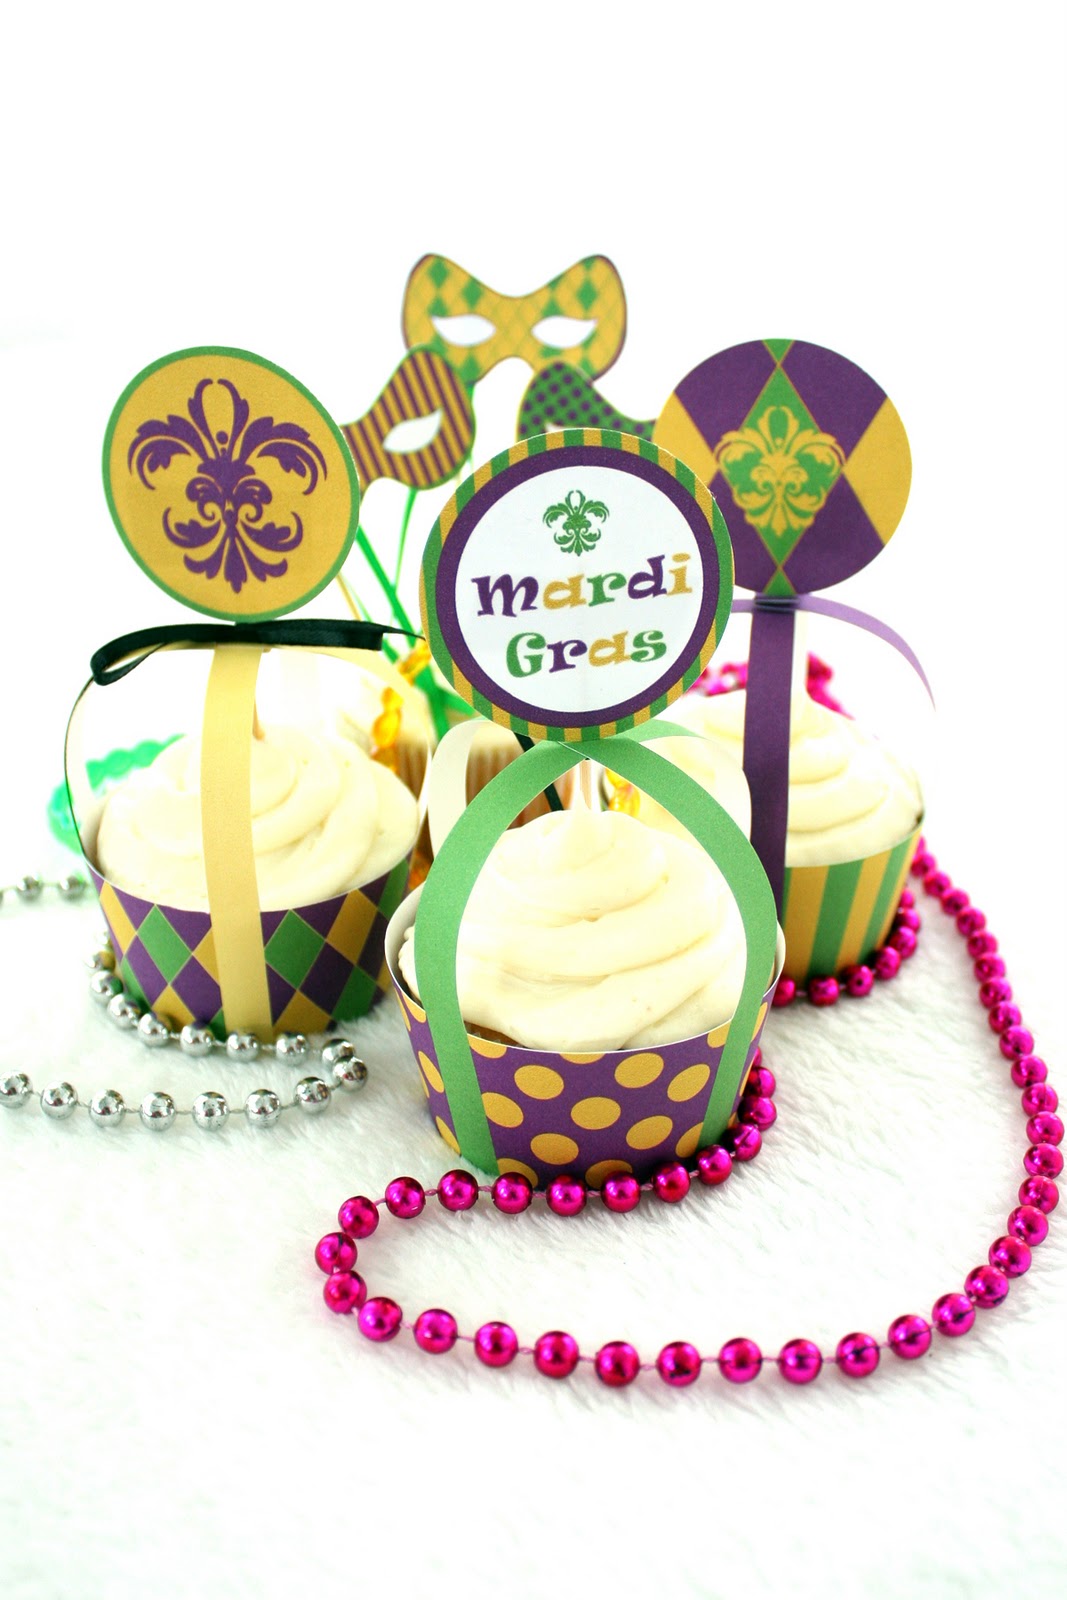 The Everyday Posh: Let's get the party started! Mardi Gras